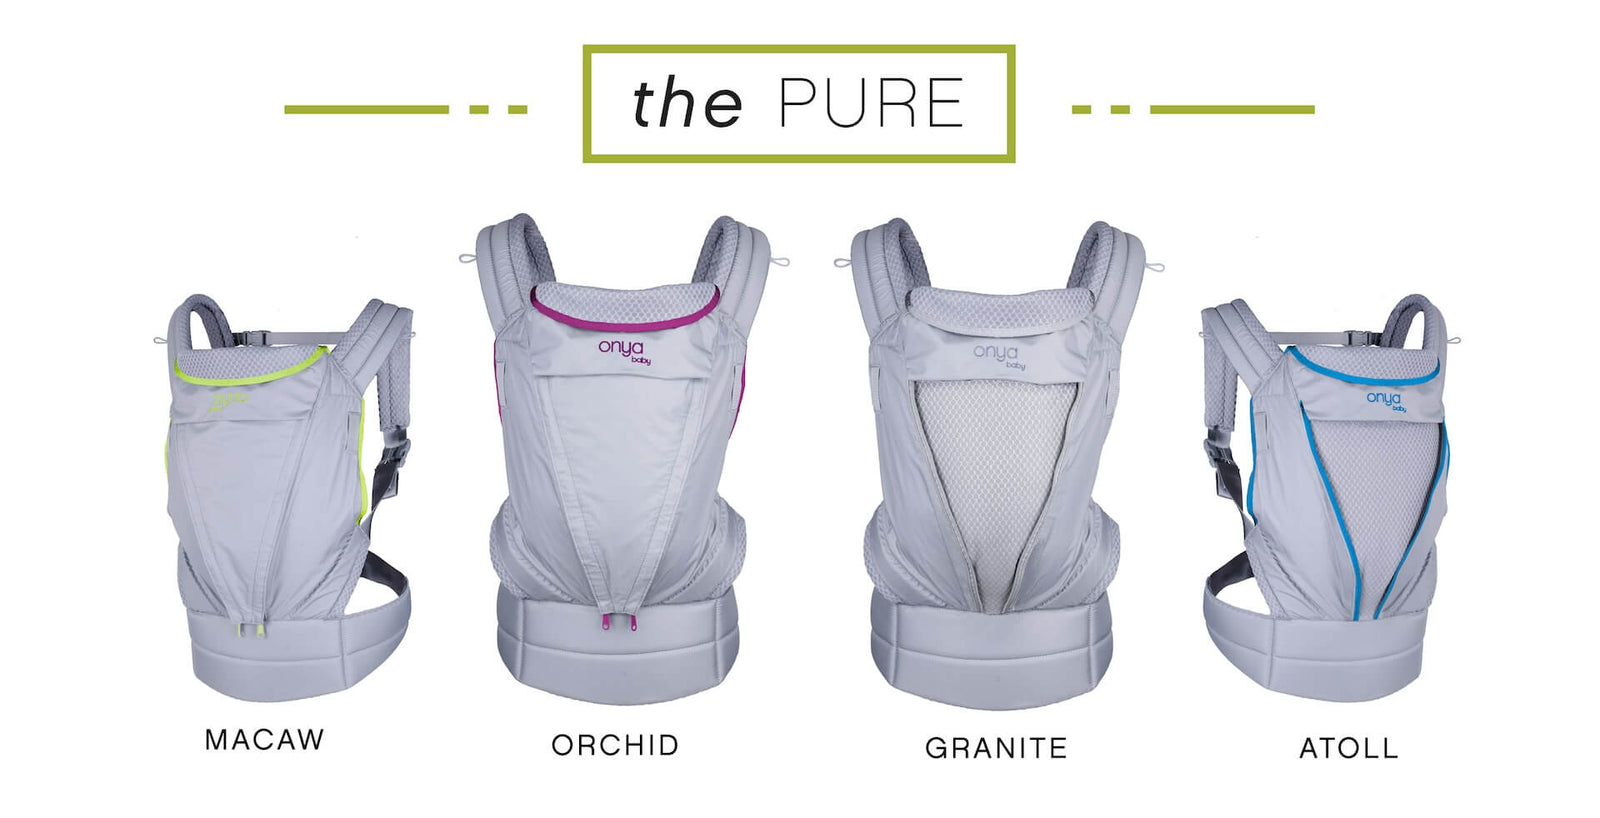 Product display showing all color variations of the Onya Baby Pure Baby Carrier